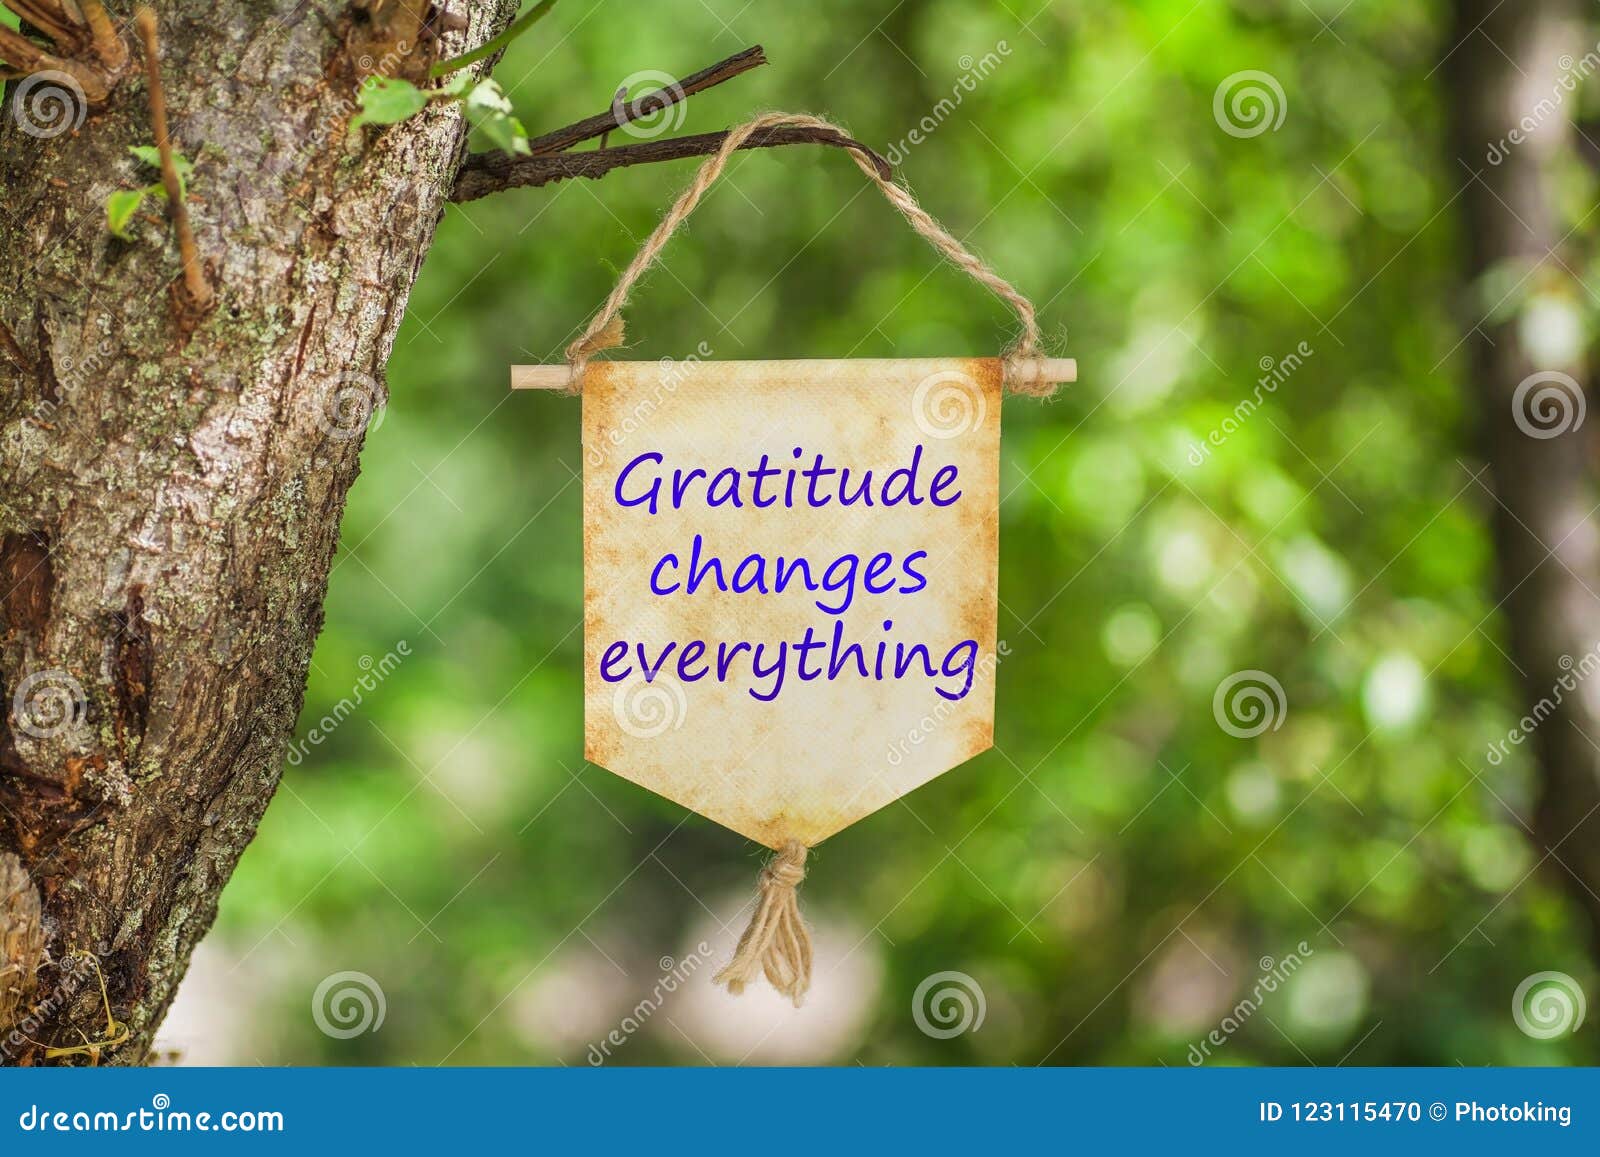 gratitude changes everything on paper scroll